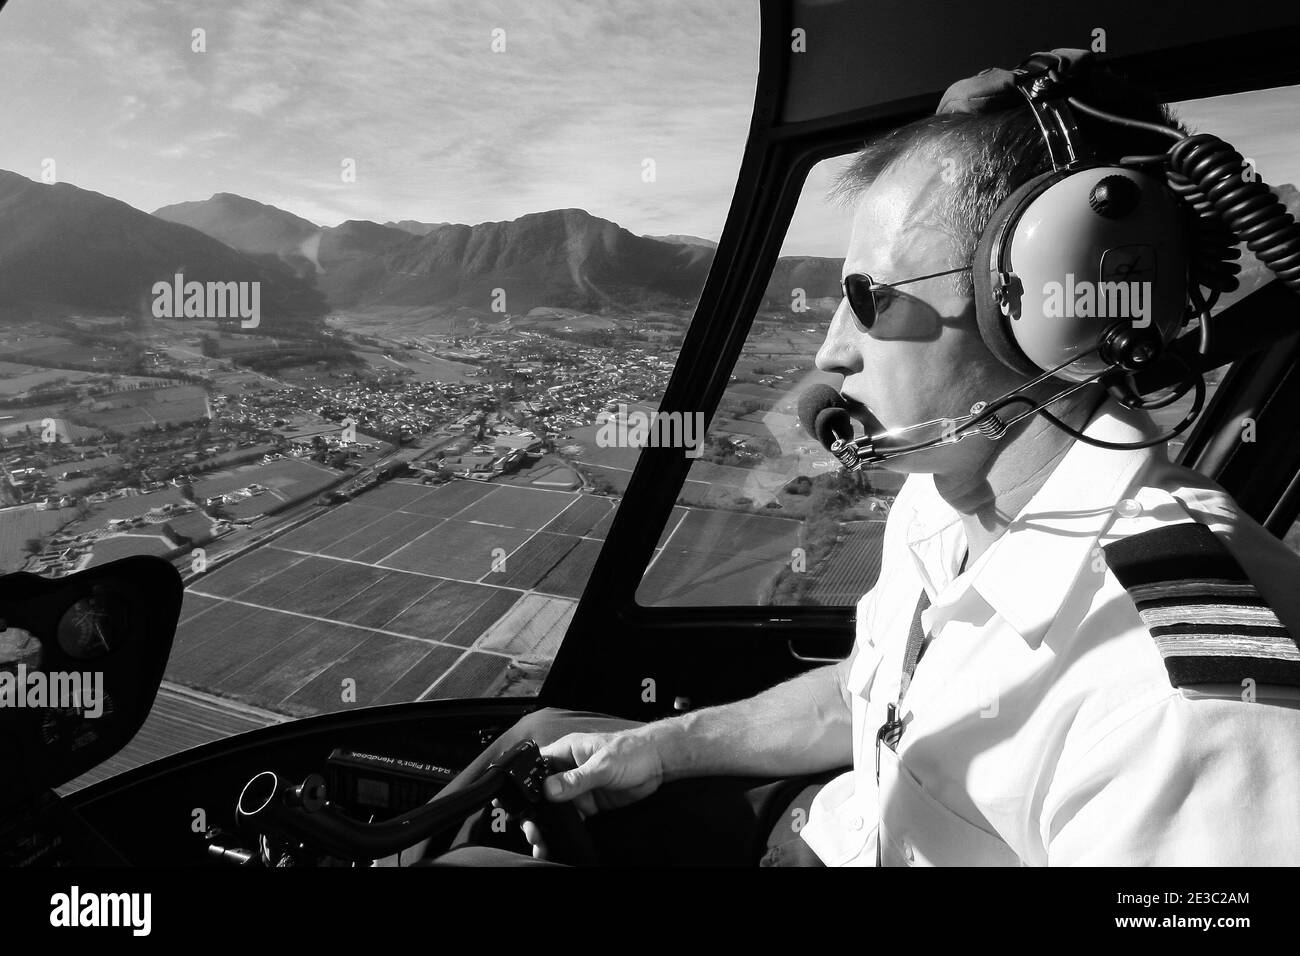 CAPE TOWN, SOUTH AFRICA - Jan 06, 2021: Hermanus, South Africa - July 20, 2009: Caucasian male helicopter pilot flying a R44 type chopper over rural a Stock Photo